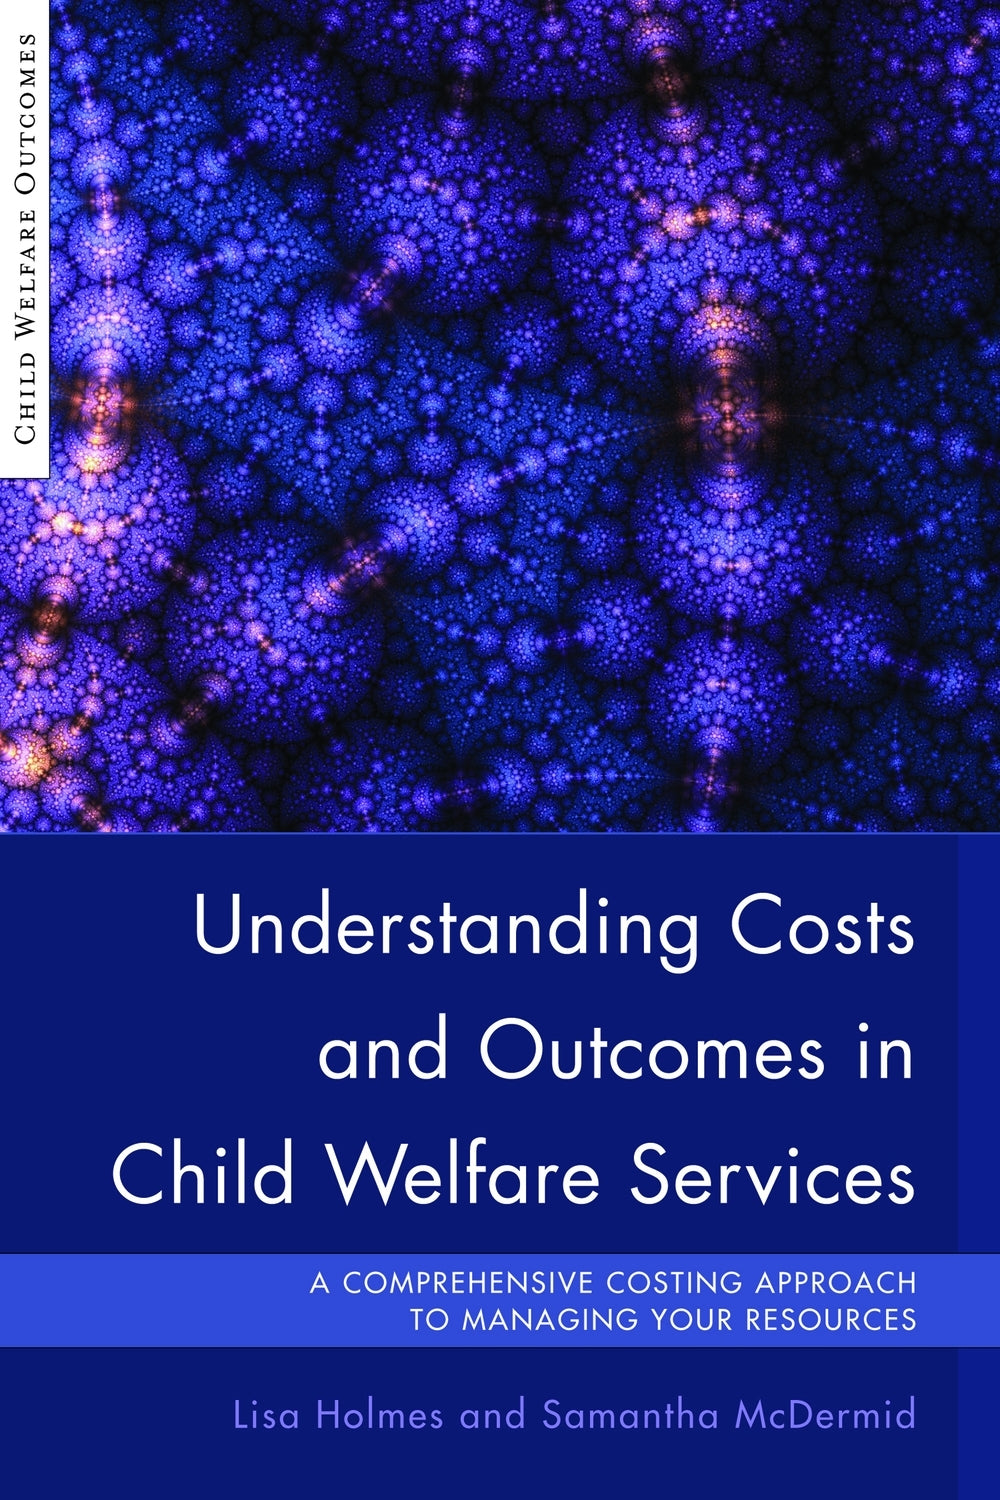 Understanding Costs and Outcomes in Child Welfare Services by Harriet Ward, Lisa Holmes, Samantha McDermid